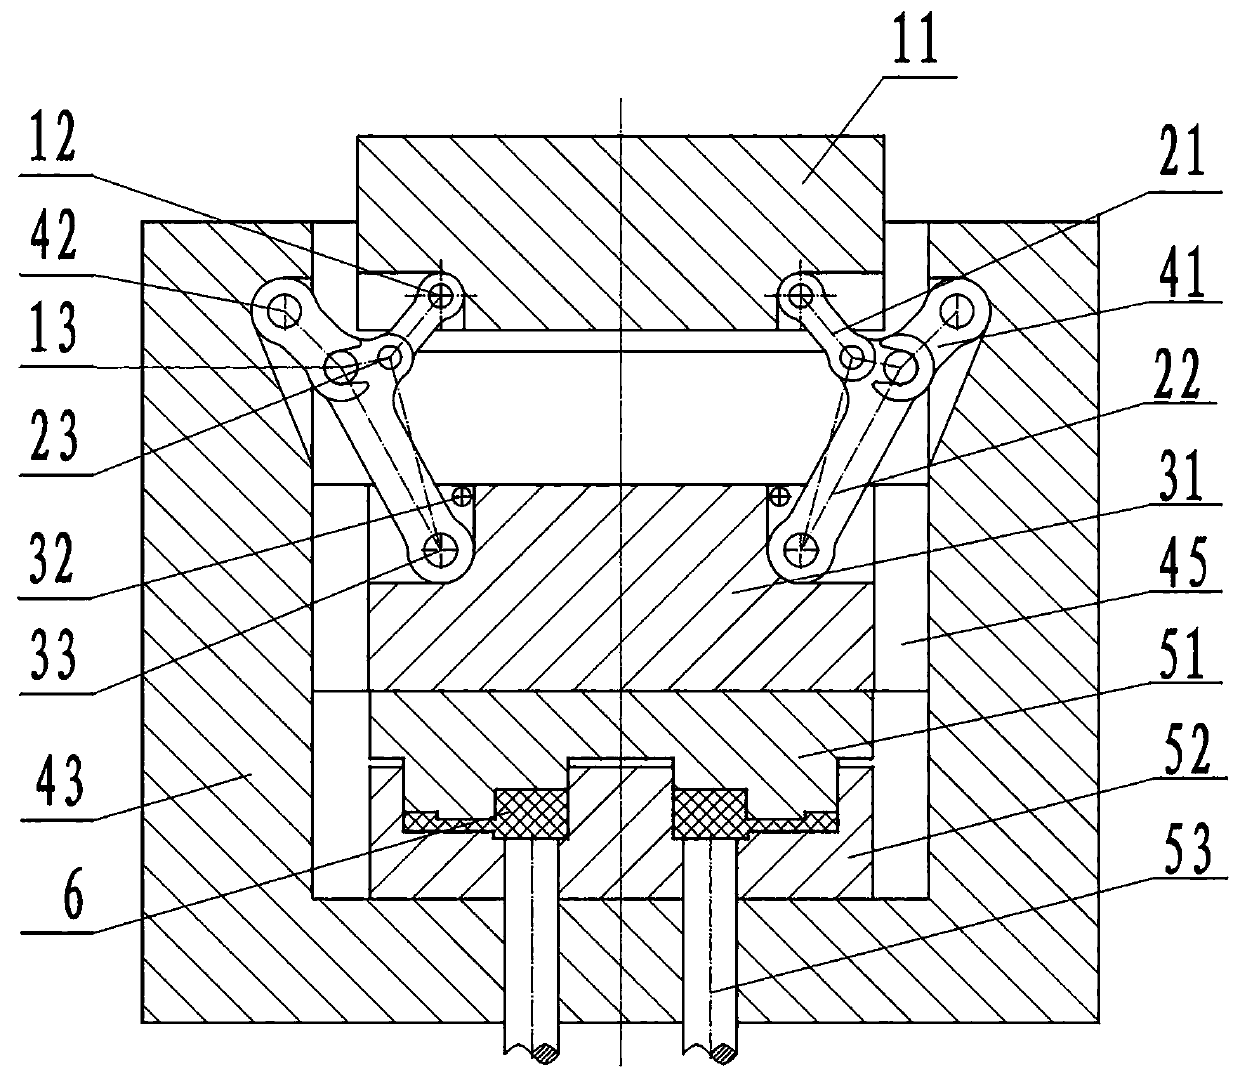 Liquid Die Forging Device and Its Supercharging Mechanism